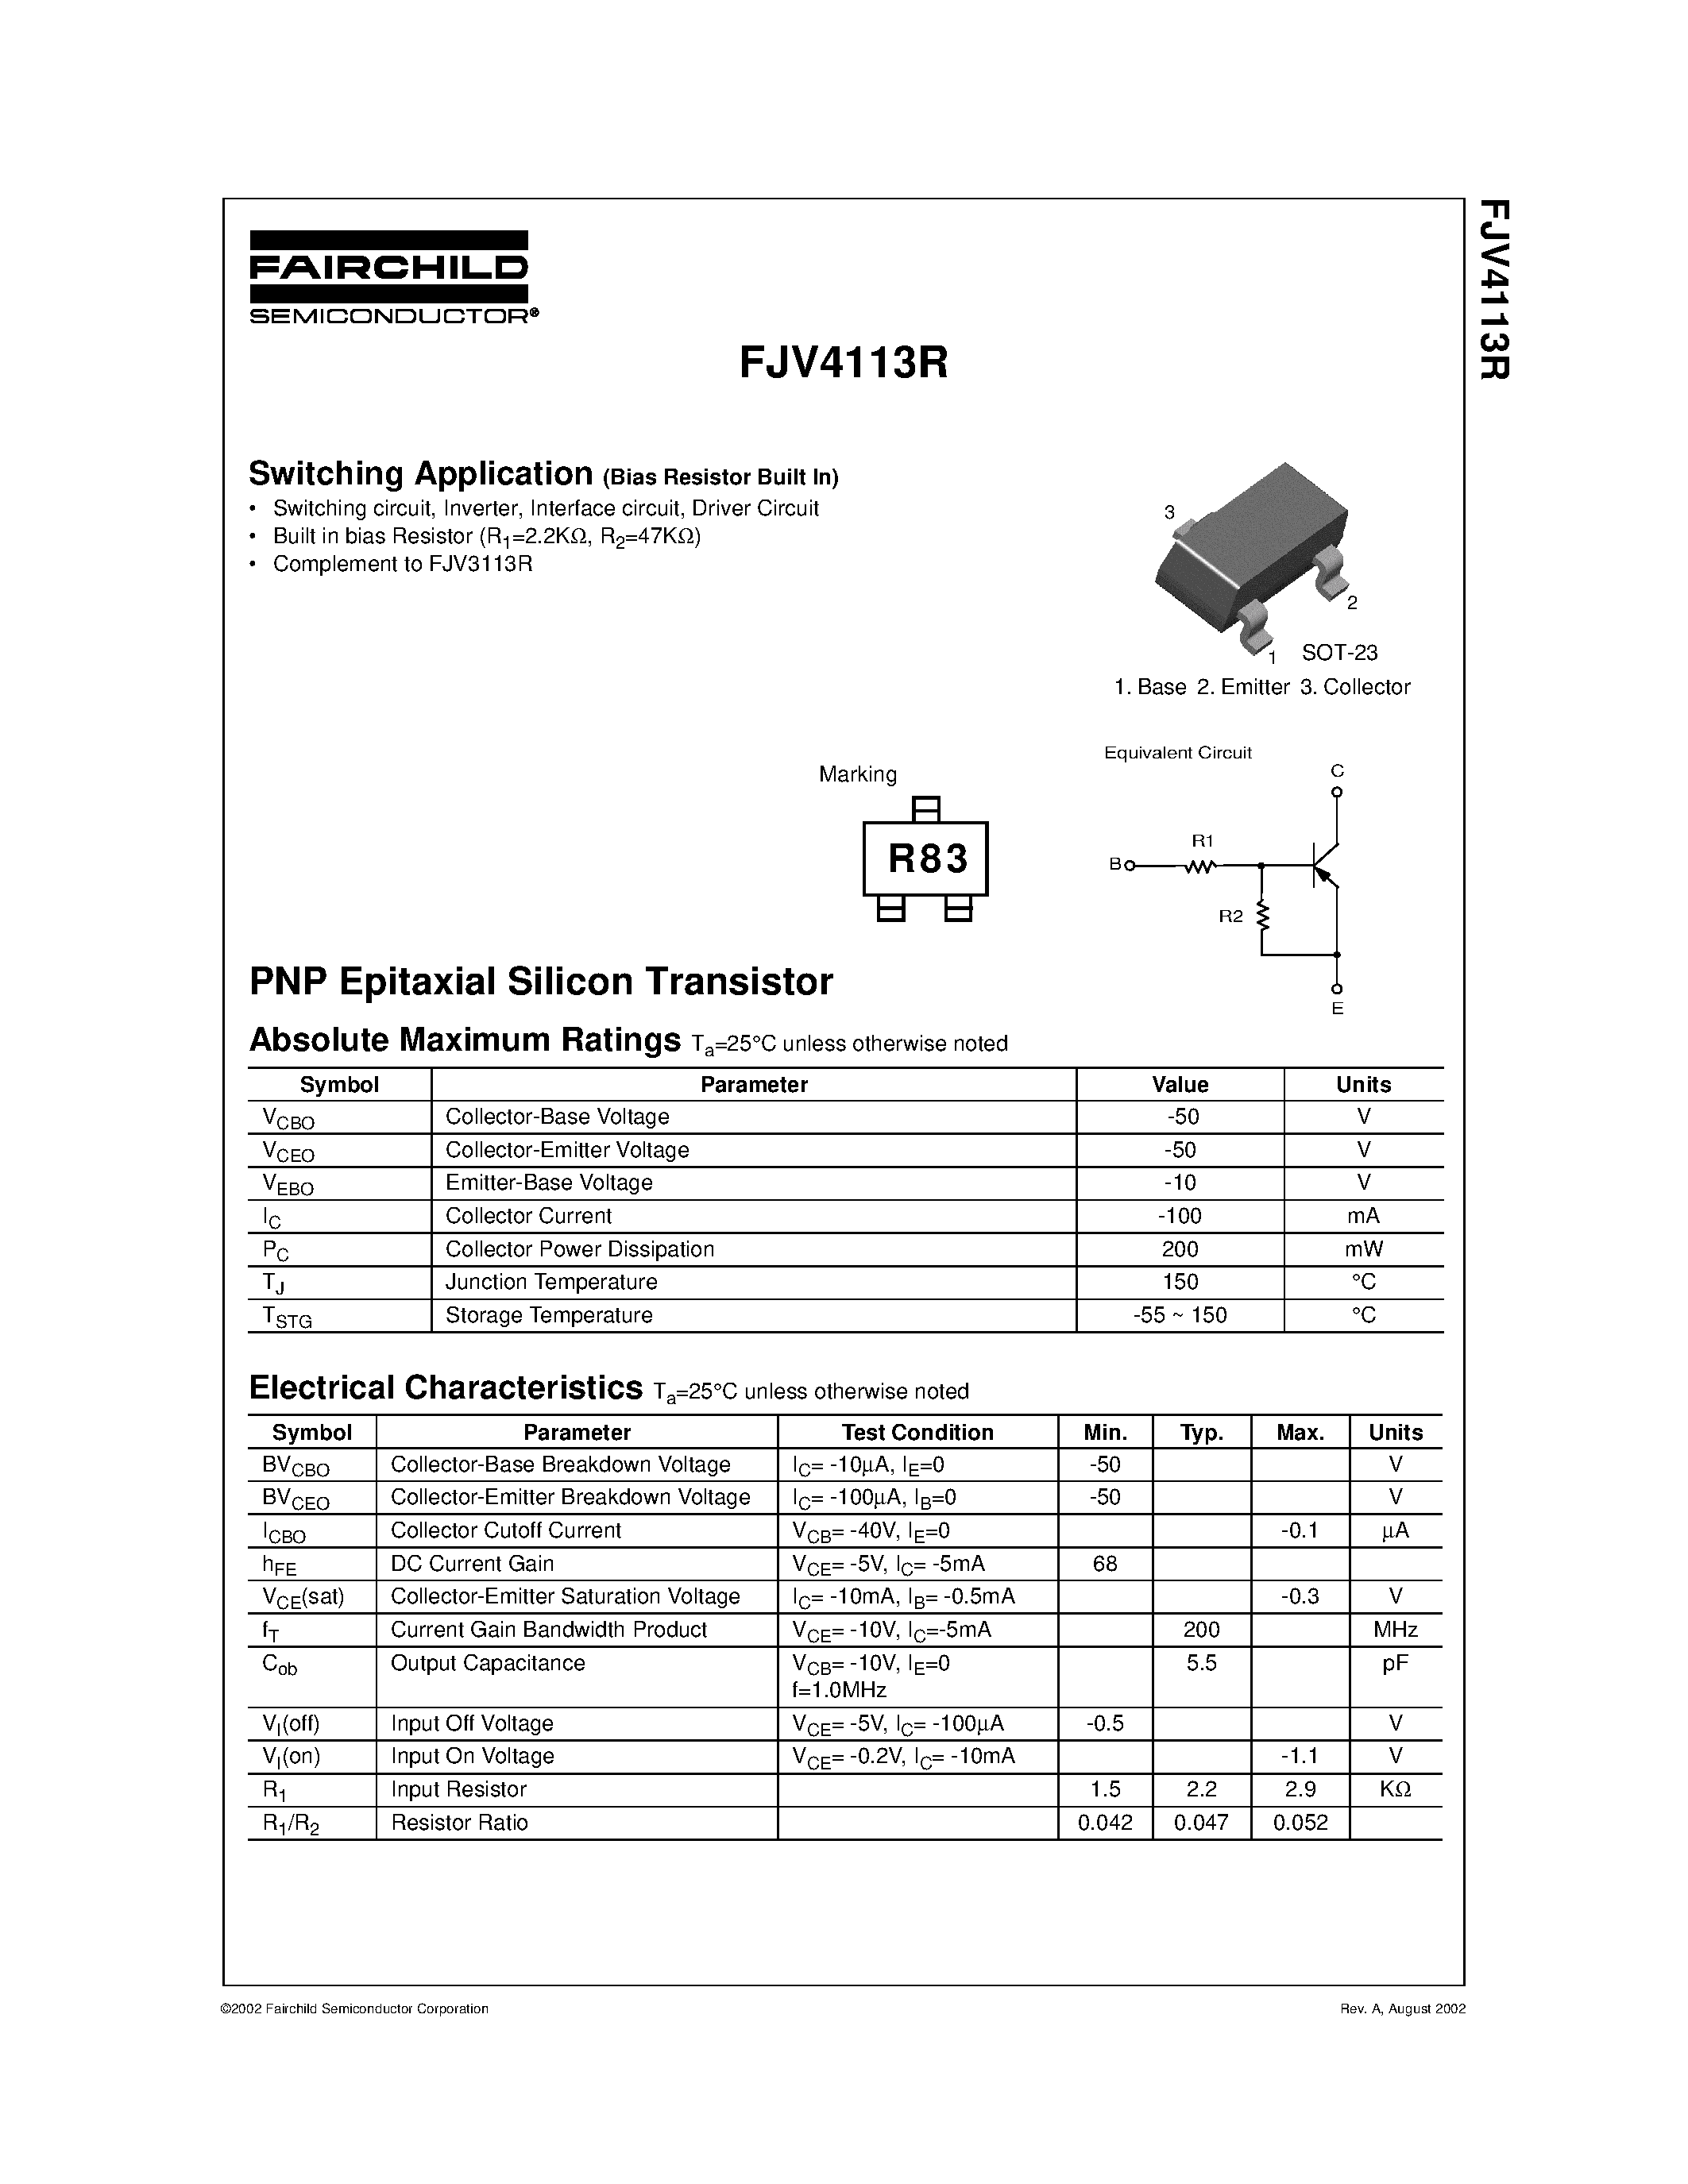 Datasheet FJV4113R - PNP Epitaxial Silicon Transistor page 1